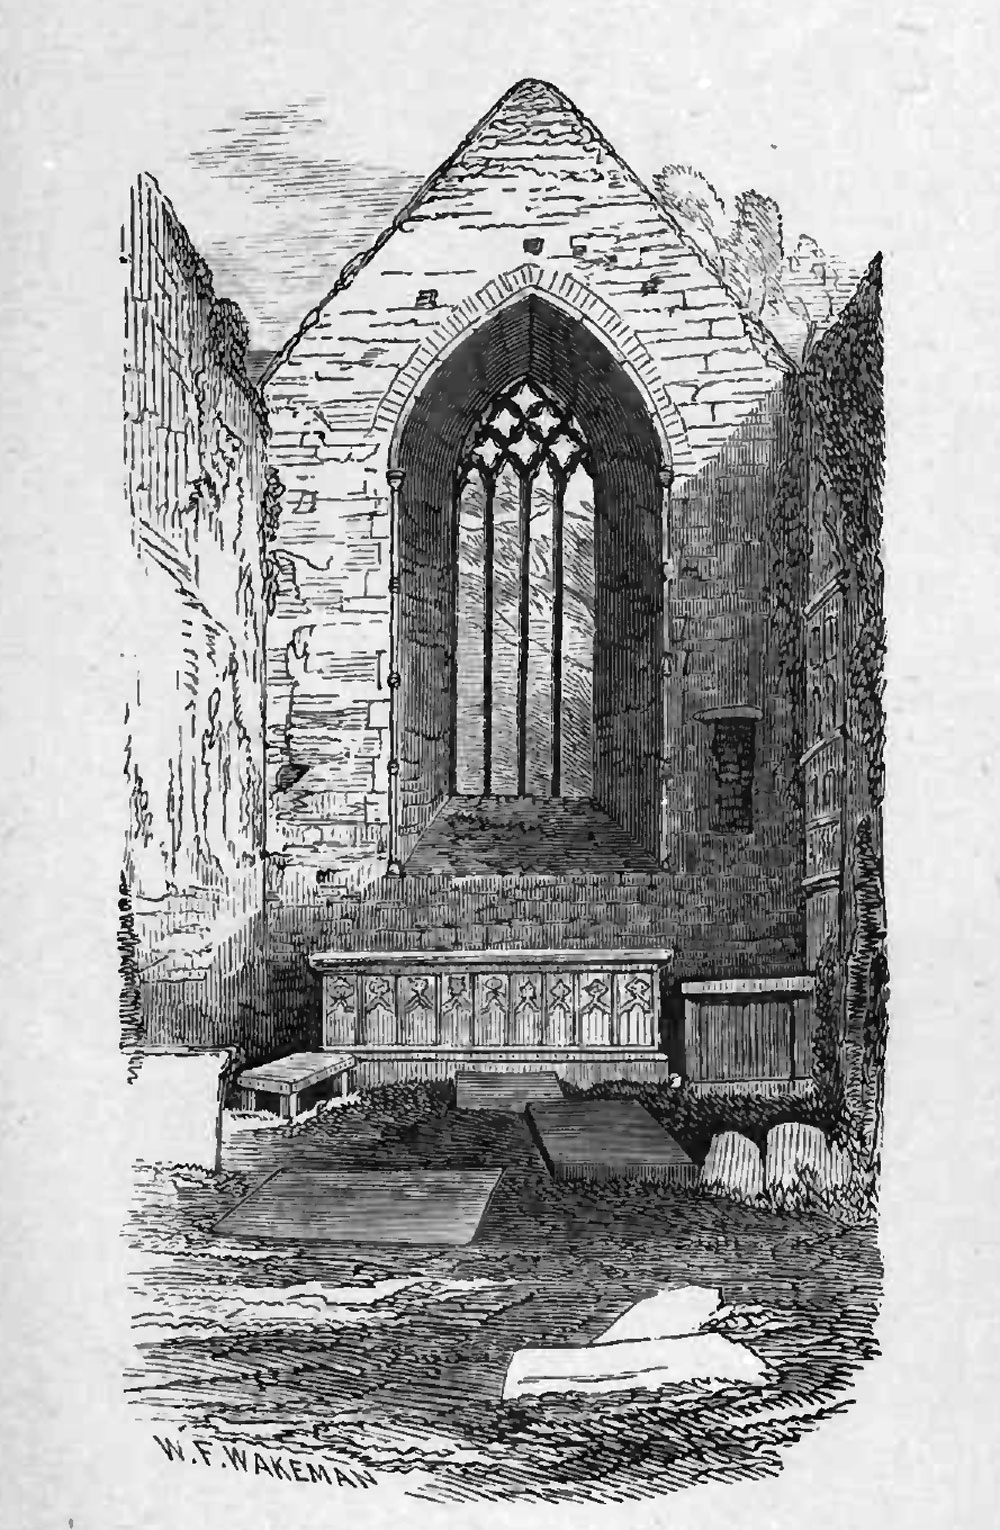 An illustration of the east window and high altar within the Choir of Sligo Dominican Friary.